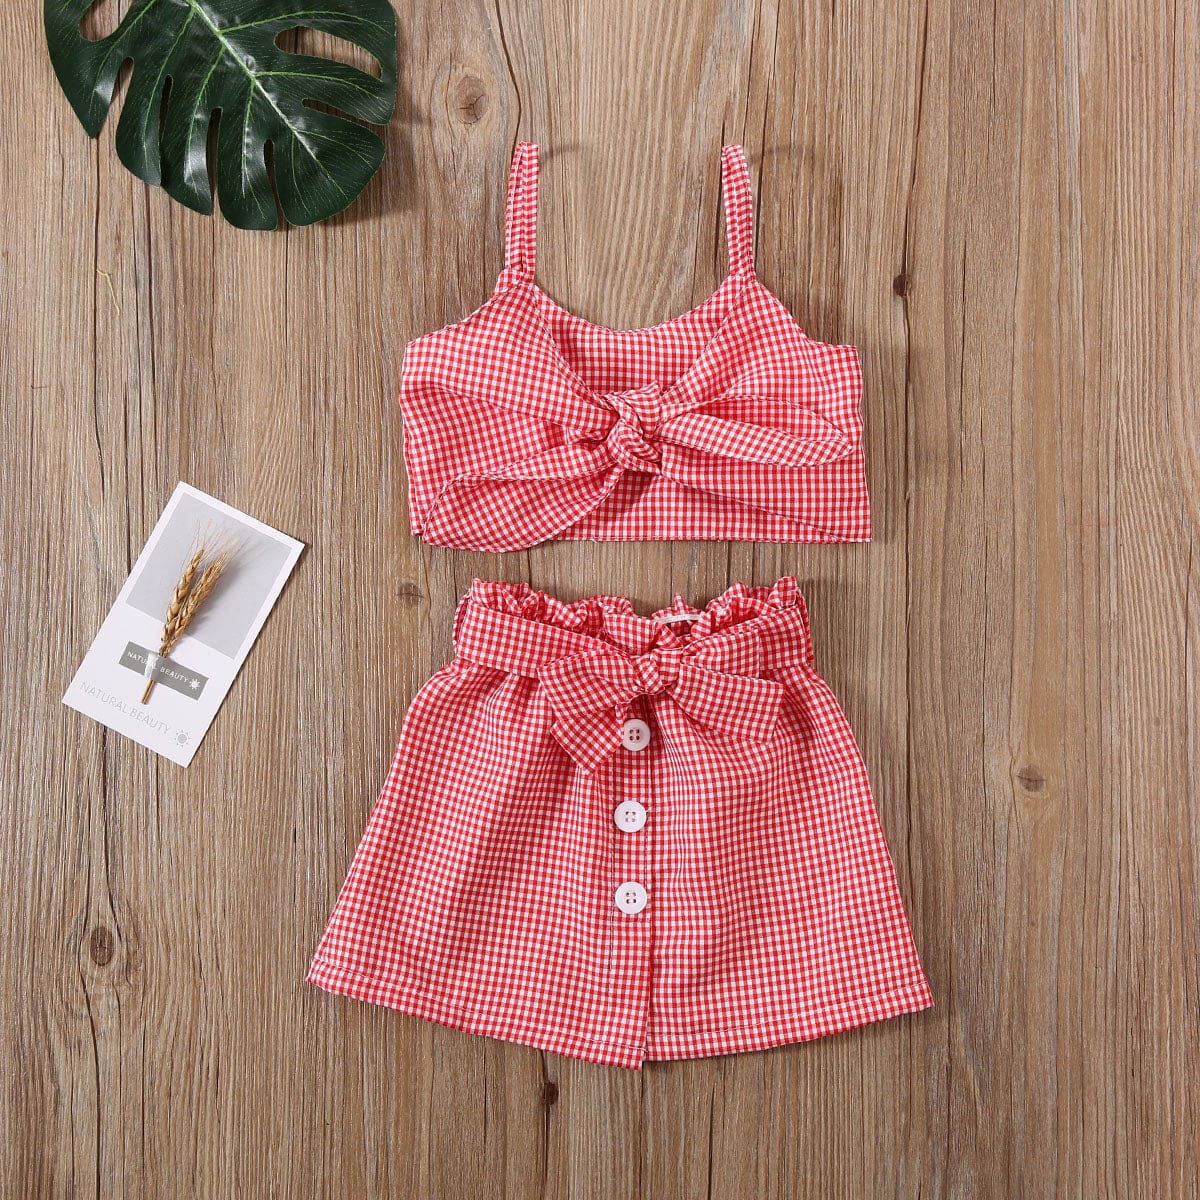 2 PCS Fashion Plaid Outfit Toddler Kids Girl Summer Clothes Bennys Beauty World